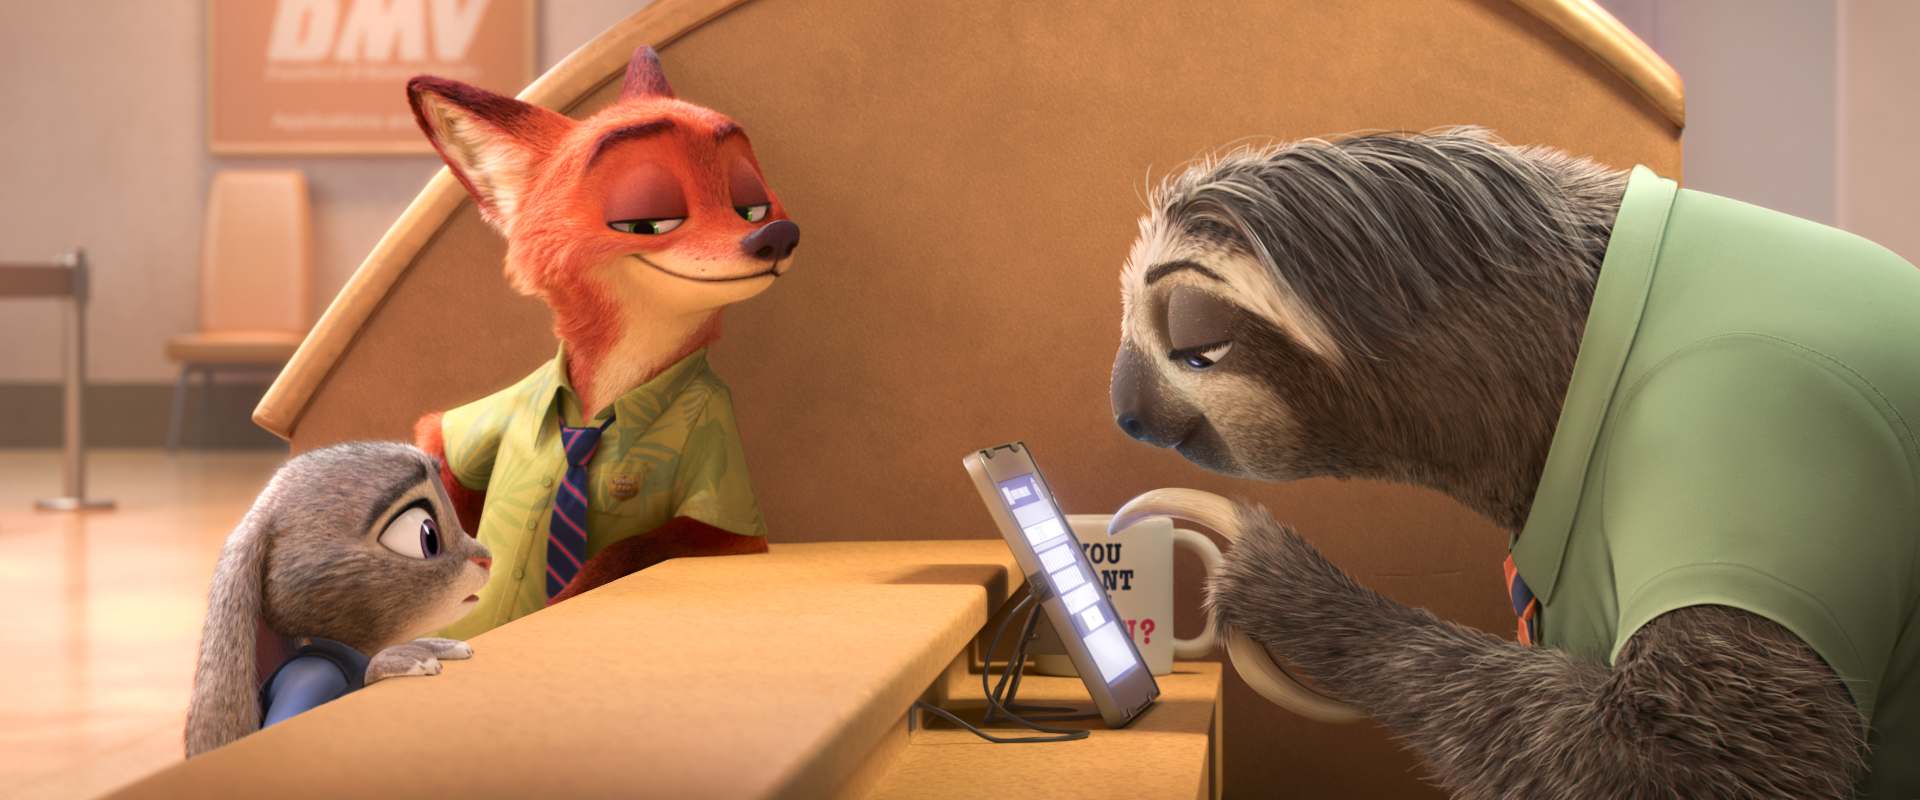 Zootopia+' Revisits a Smiling Sloth, Con-Artist Weasel, and Other Colorful  Characters | Animation World Network